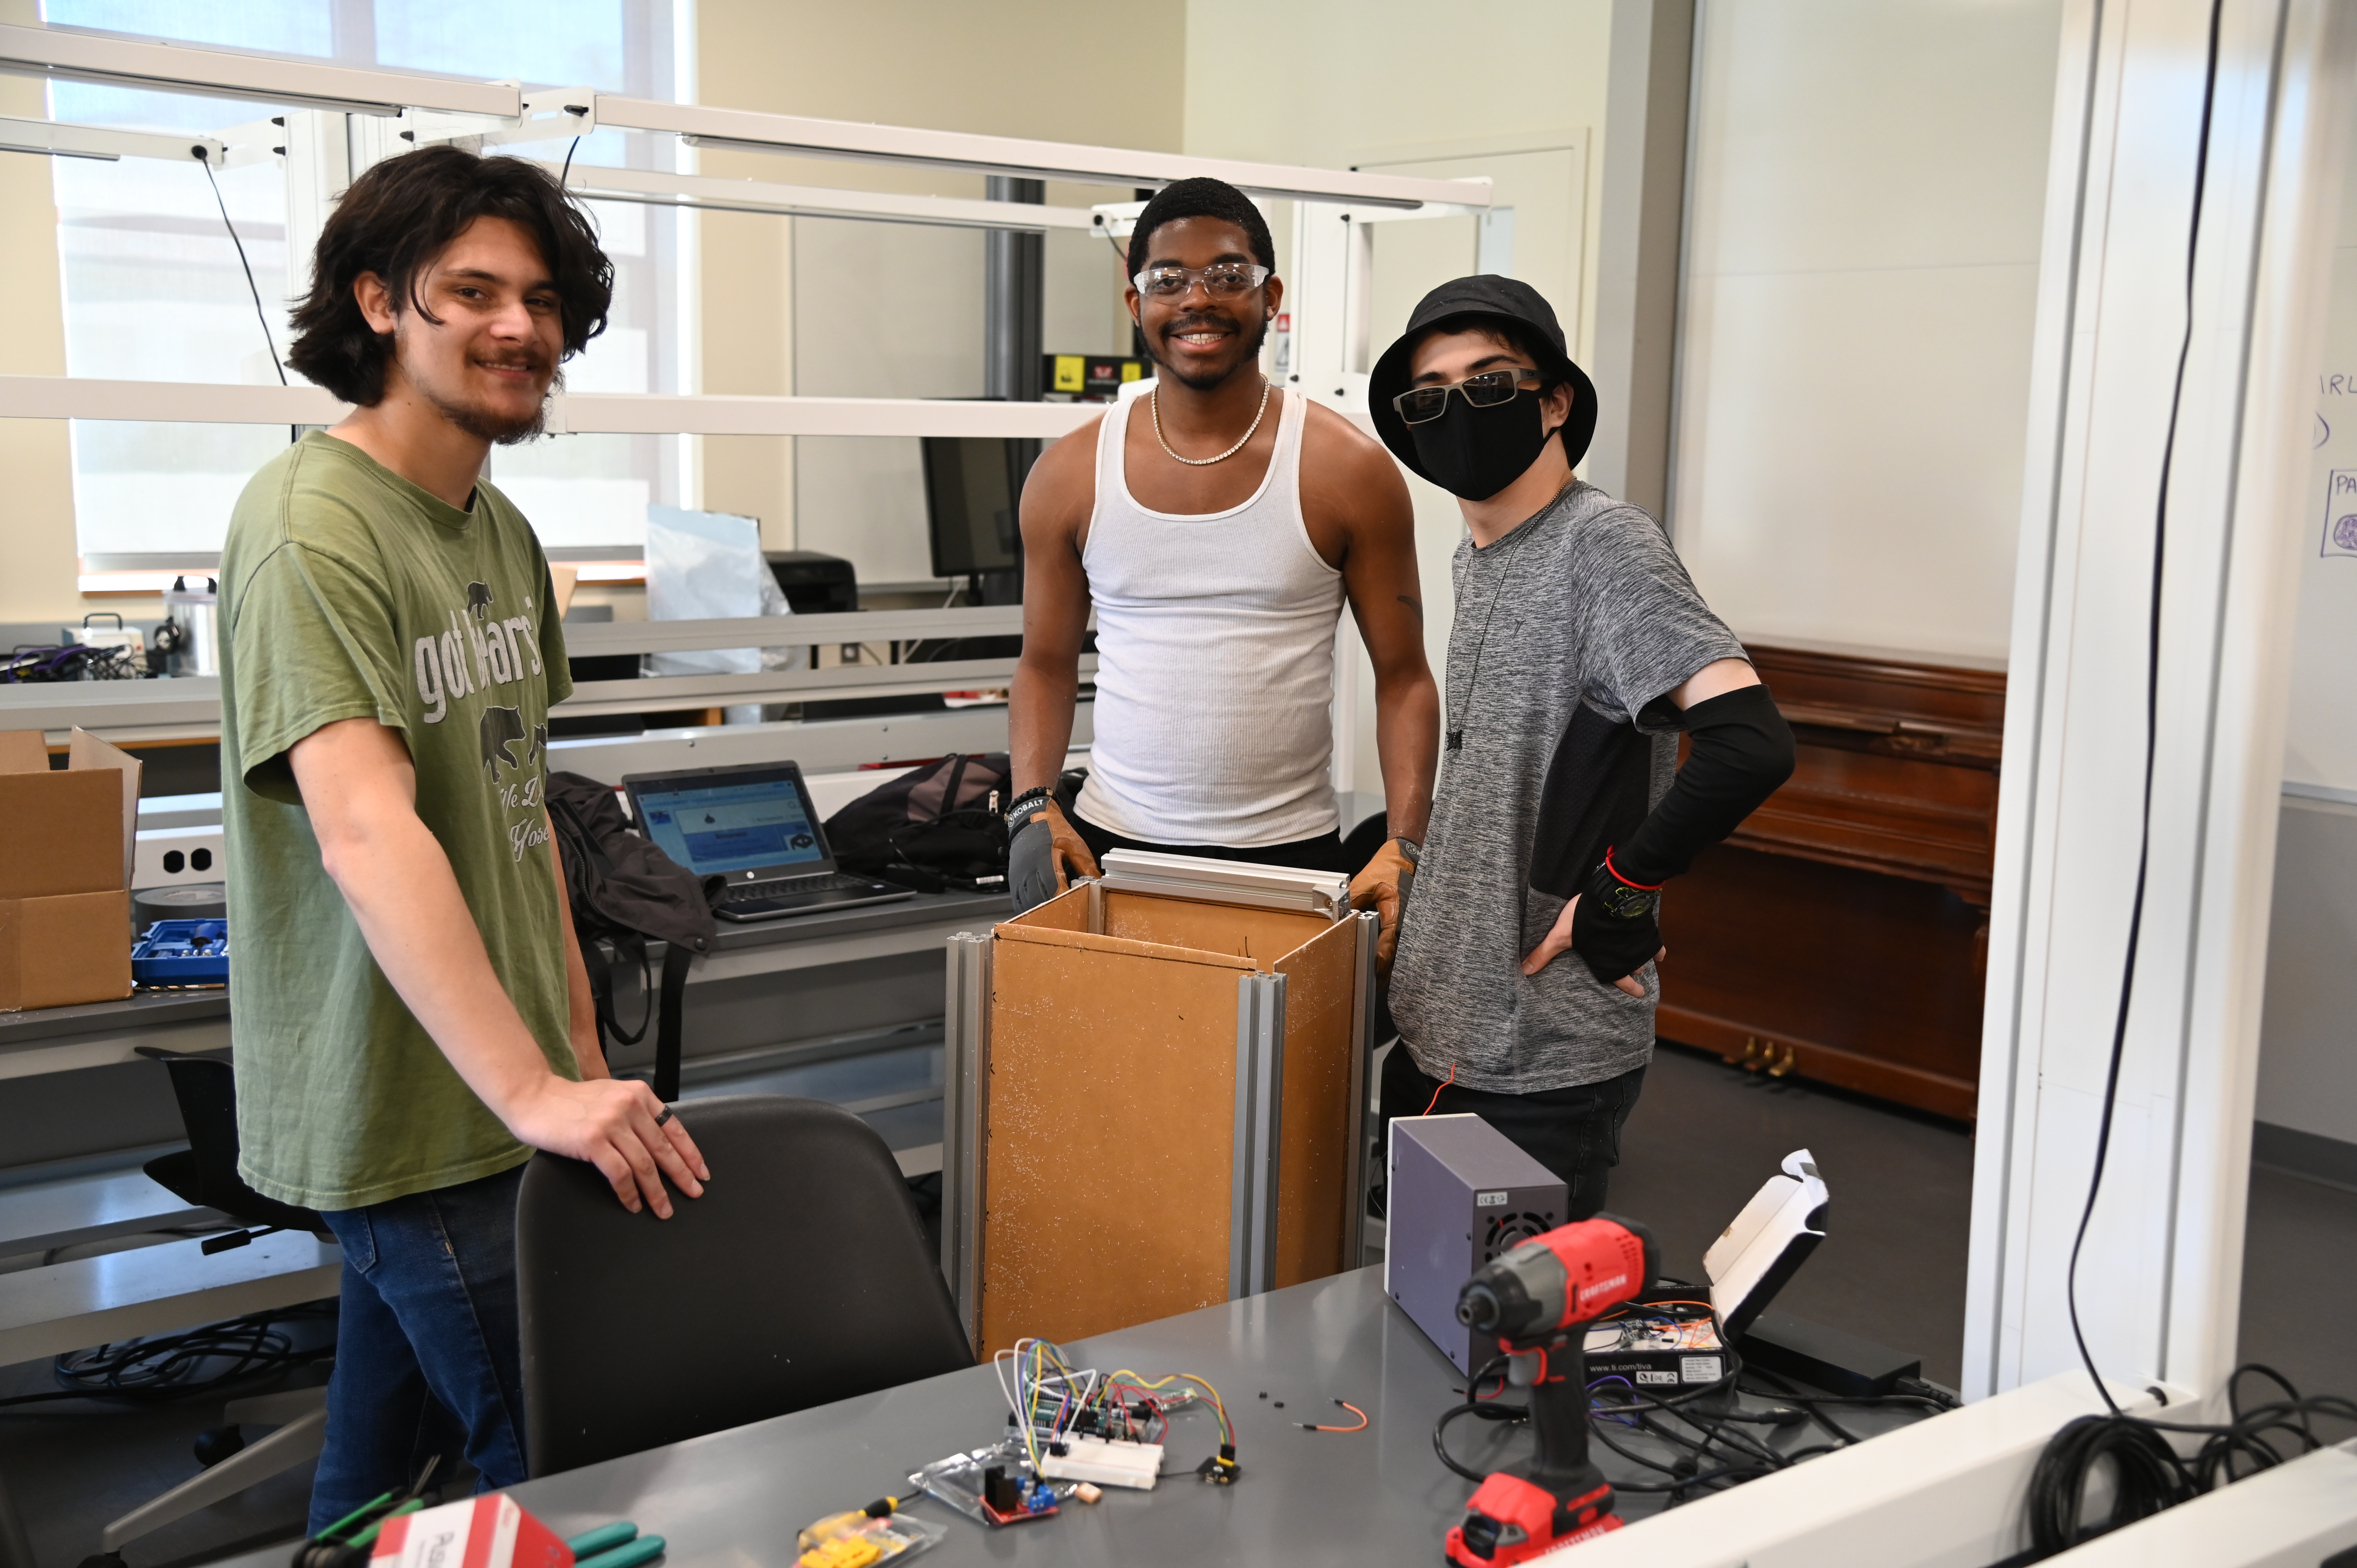 Bennett Rousseau, Quentin Thomas, and Kc Hebrard (left to right) are building an autonomous items carrier - portable story. Users connect via Bluetooth, and this portable storage unit will follow a person around using GPS location.